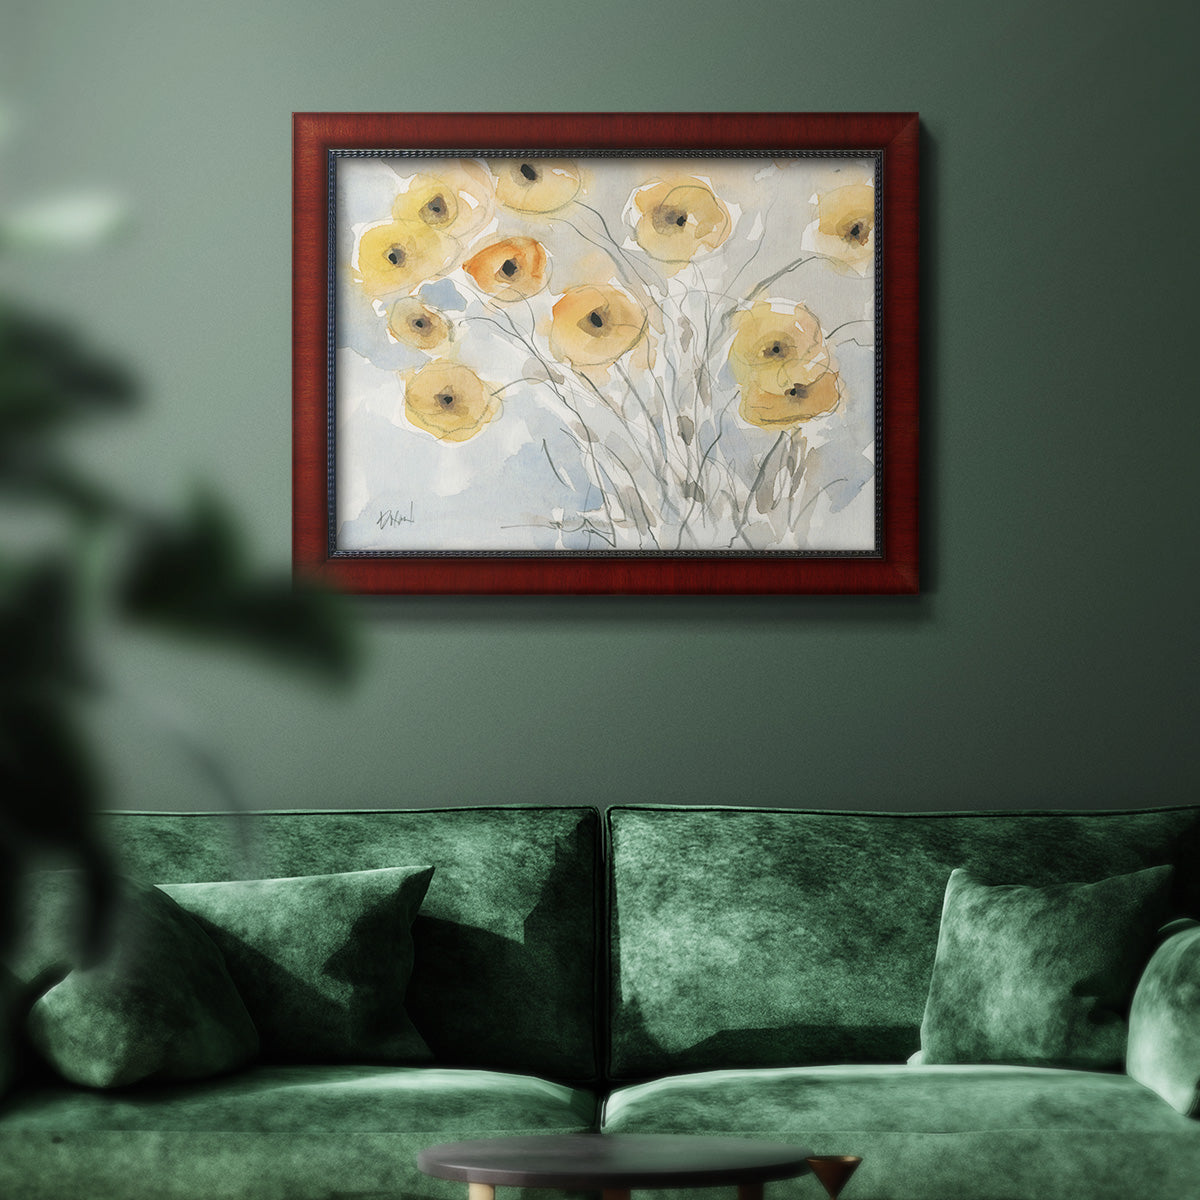 Sunset Poppies II Premium Framed Canvas- Ready to Hang